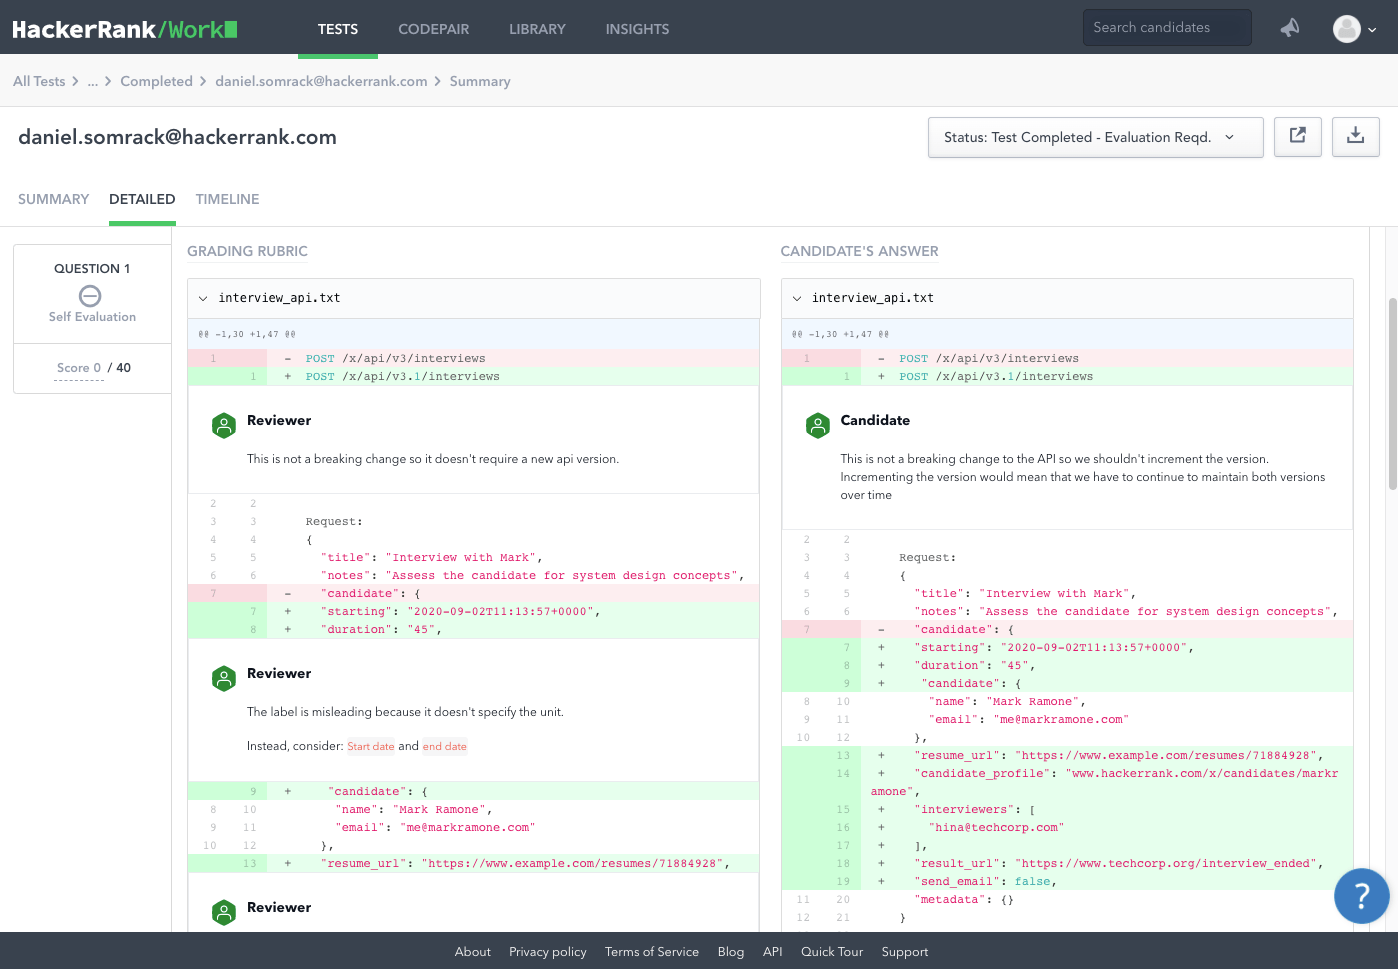 Summary of a test under Tests dashboard in HackerRank for Work